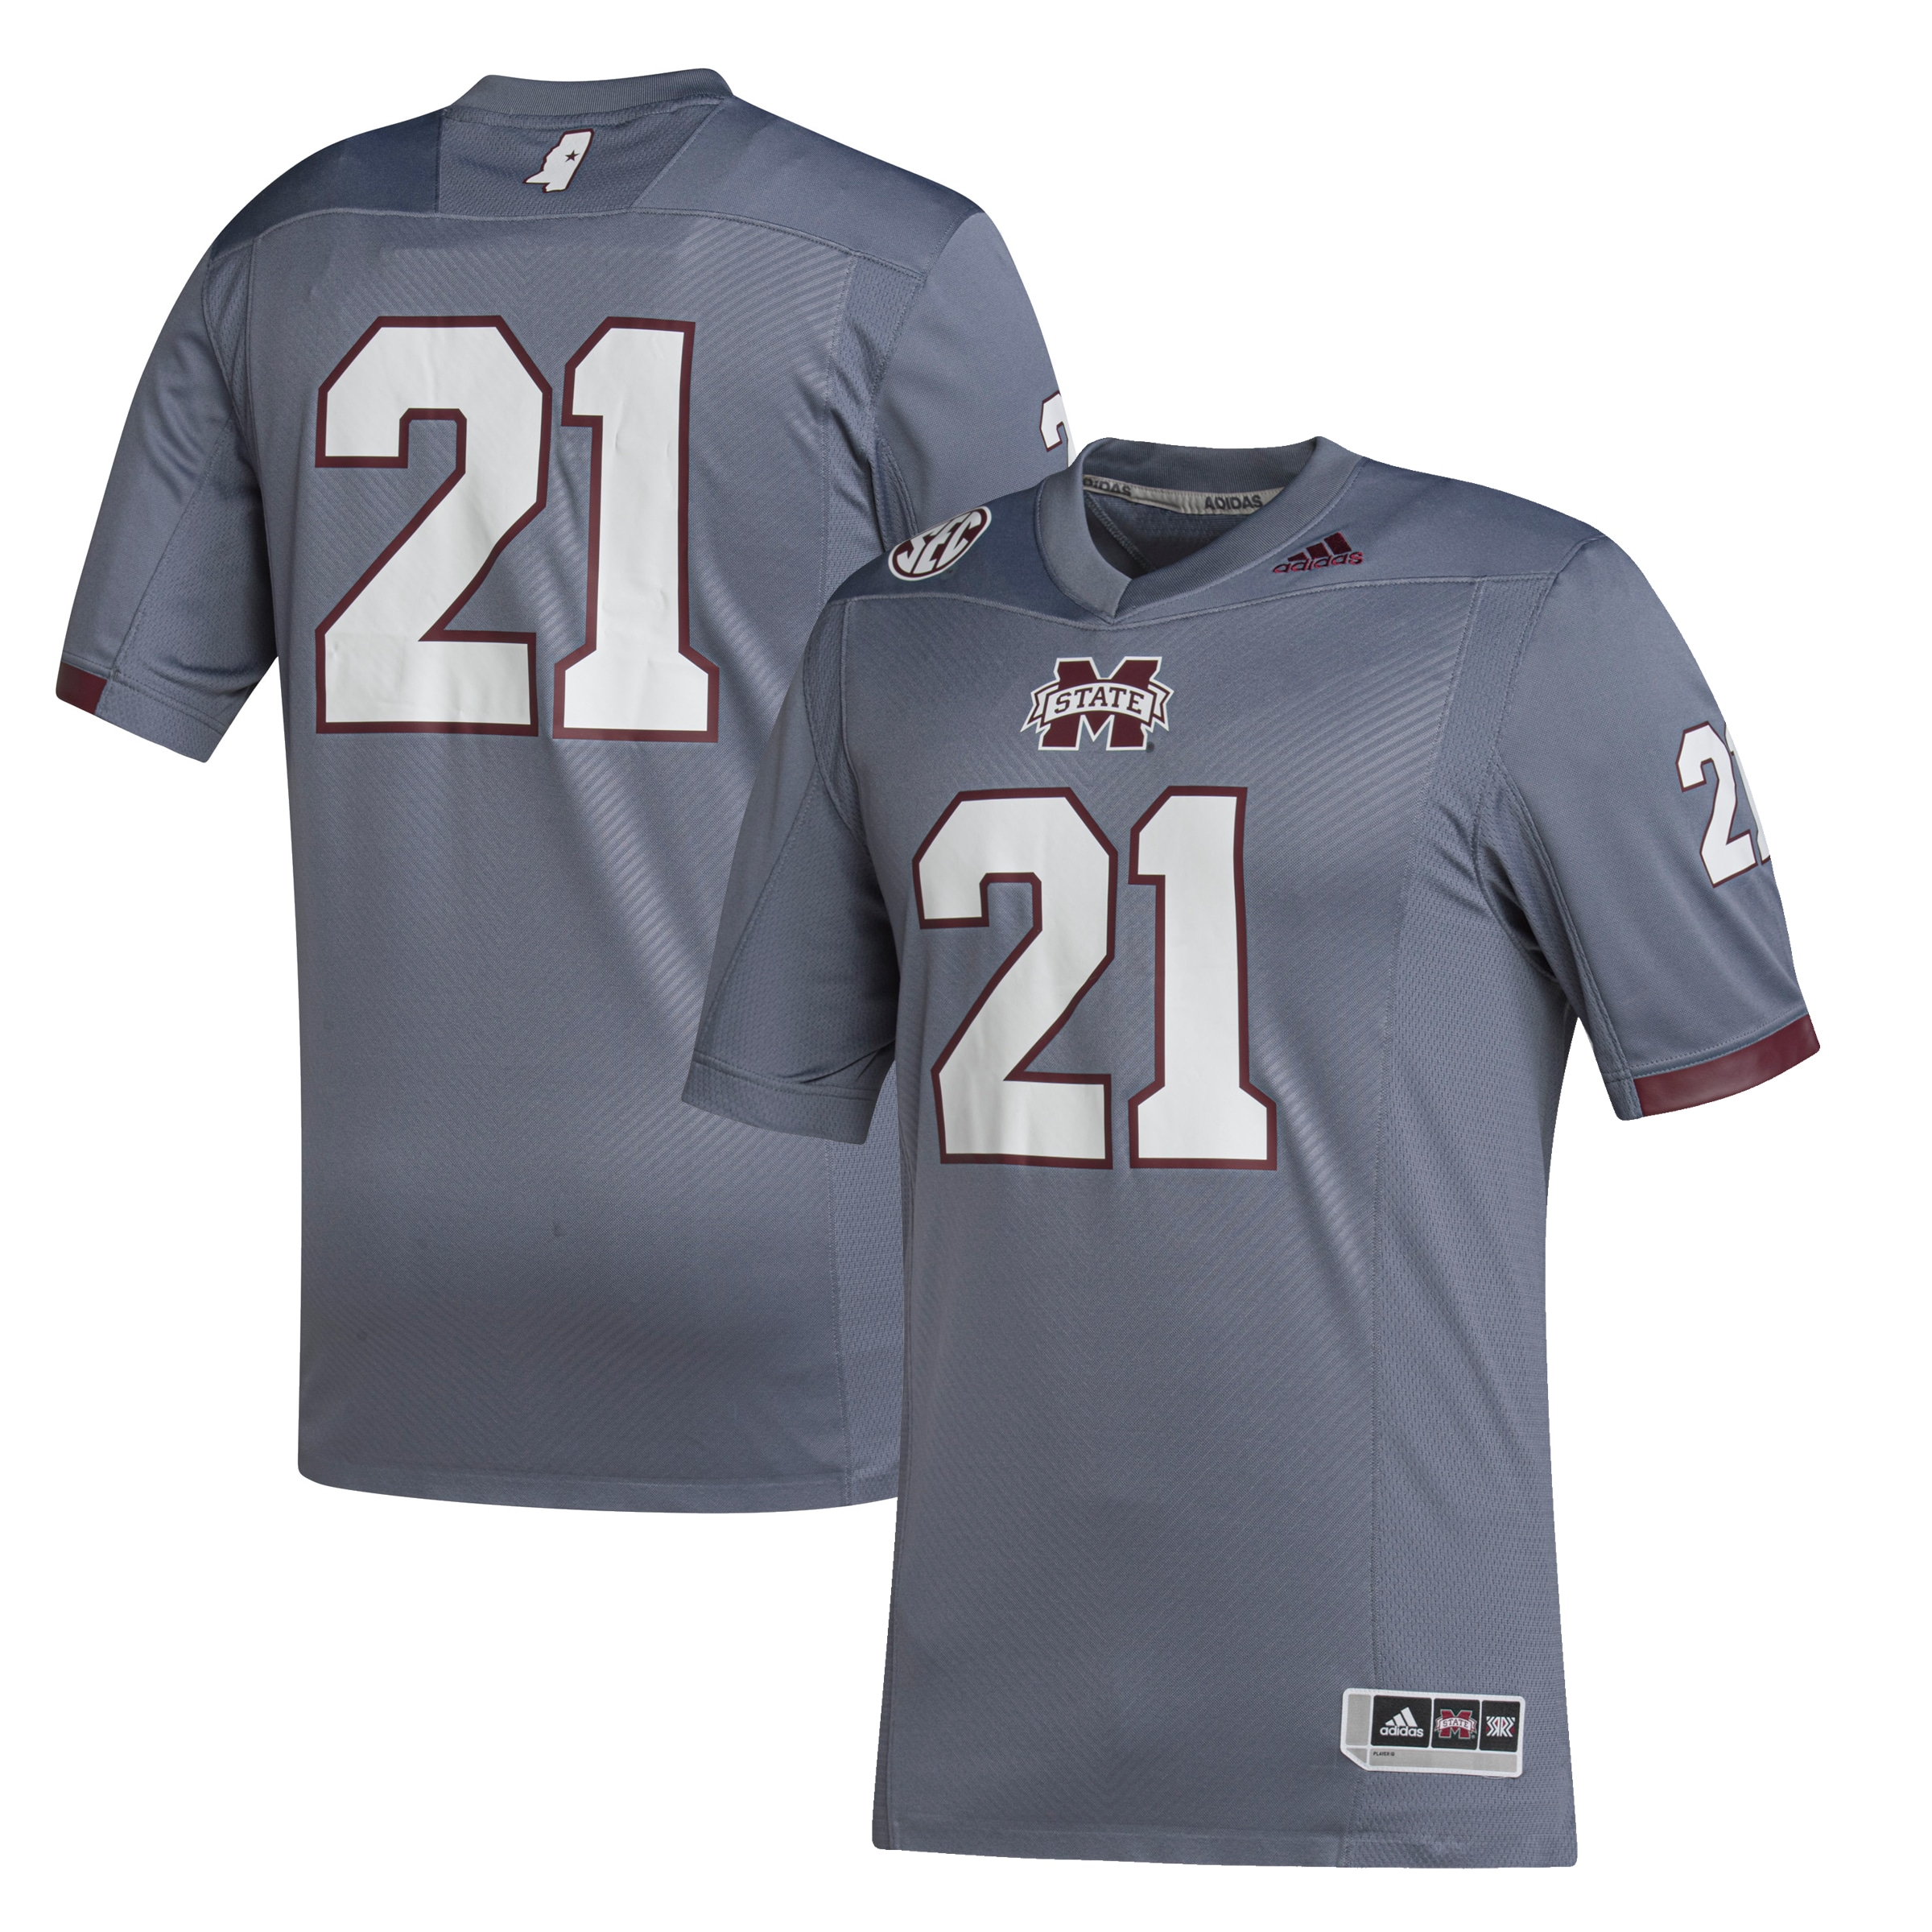 #21 Mississippi State Bulldogs   Premier Strategy Jersey - Gray For Youth Women Men